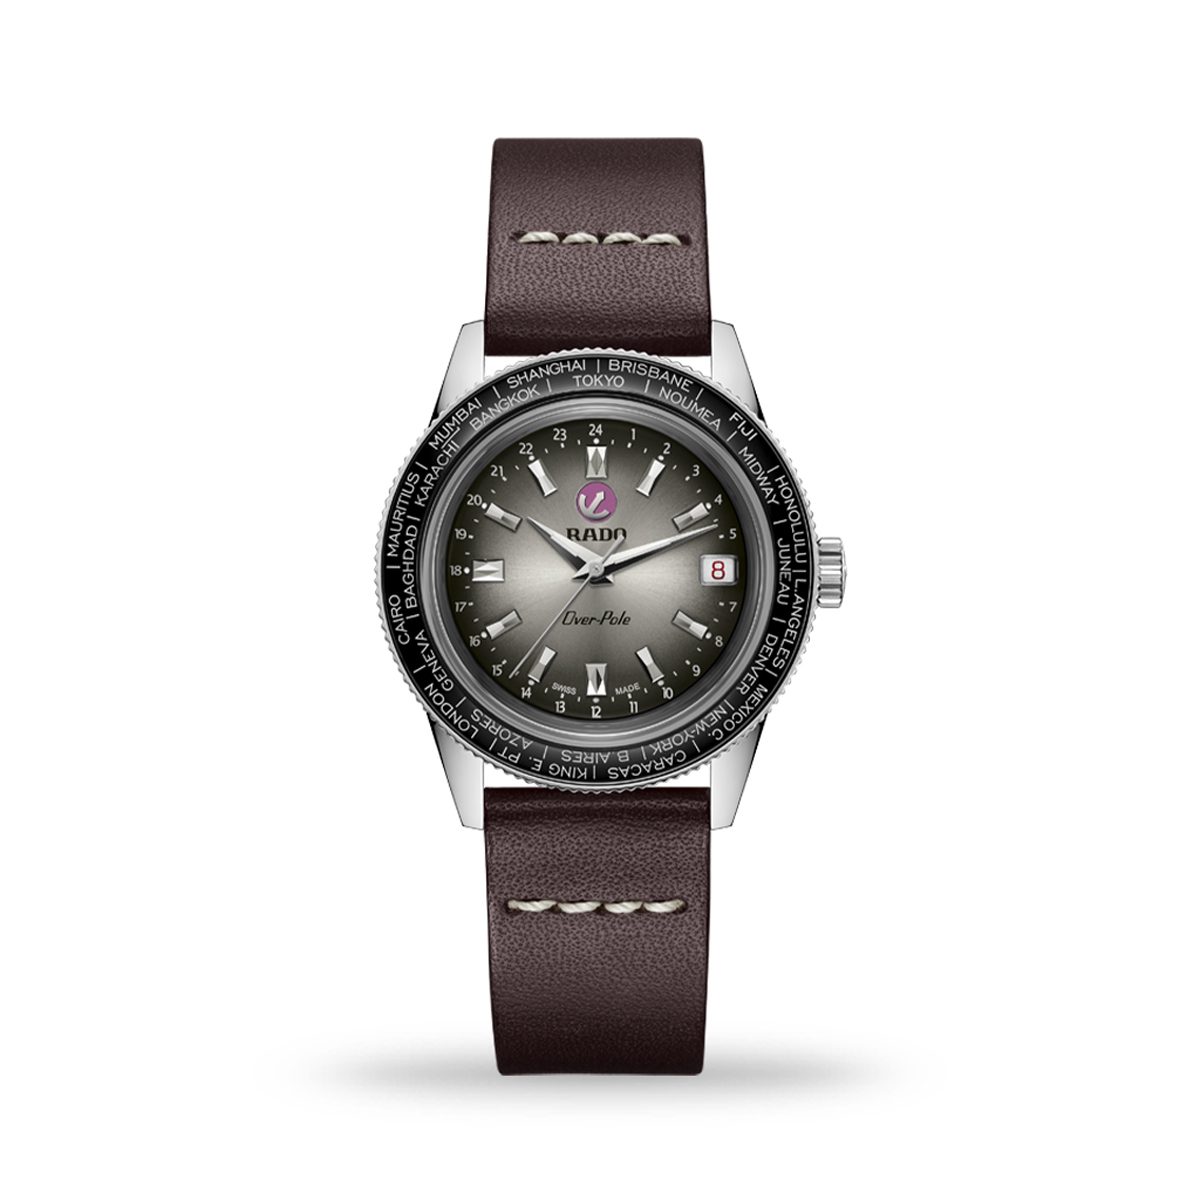 Rado Captain Cook Over-Pole 37mm Hand-Wound Leather Strap